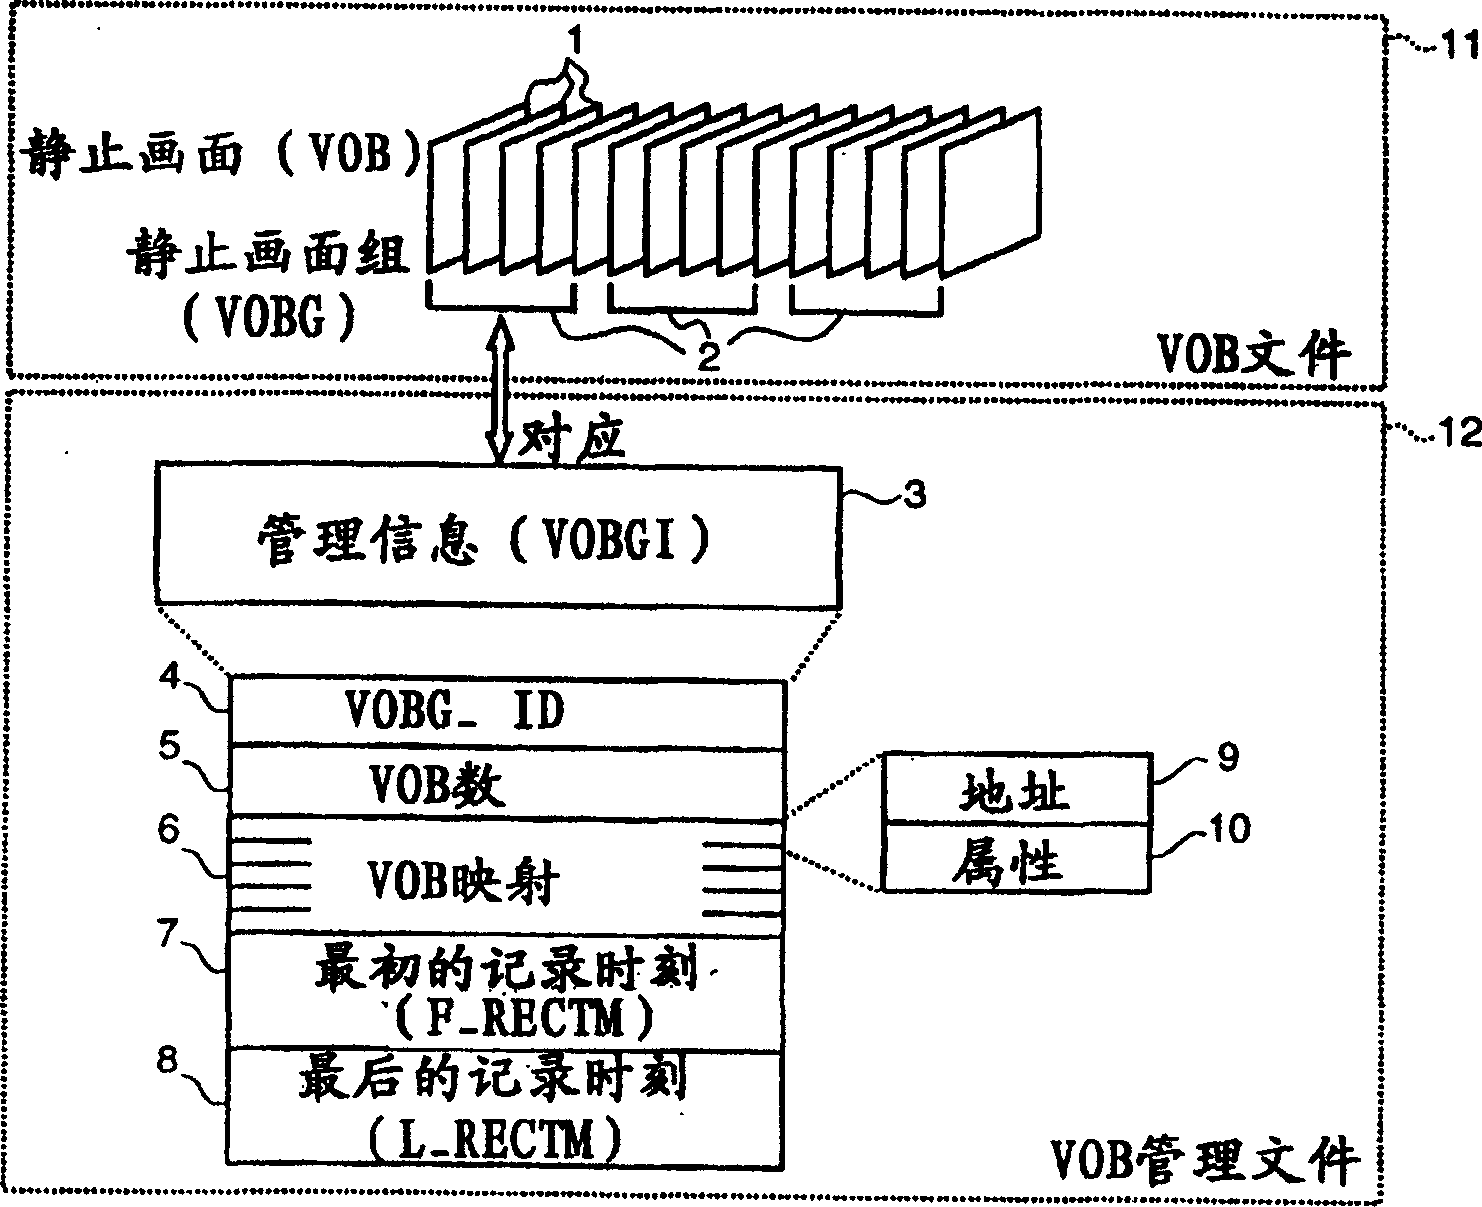 Playback apparatus and method